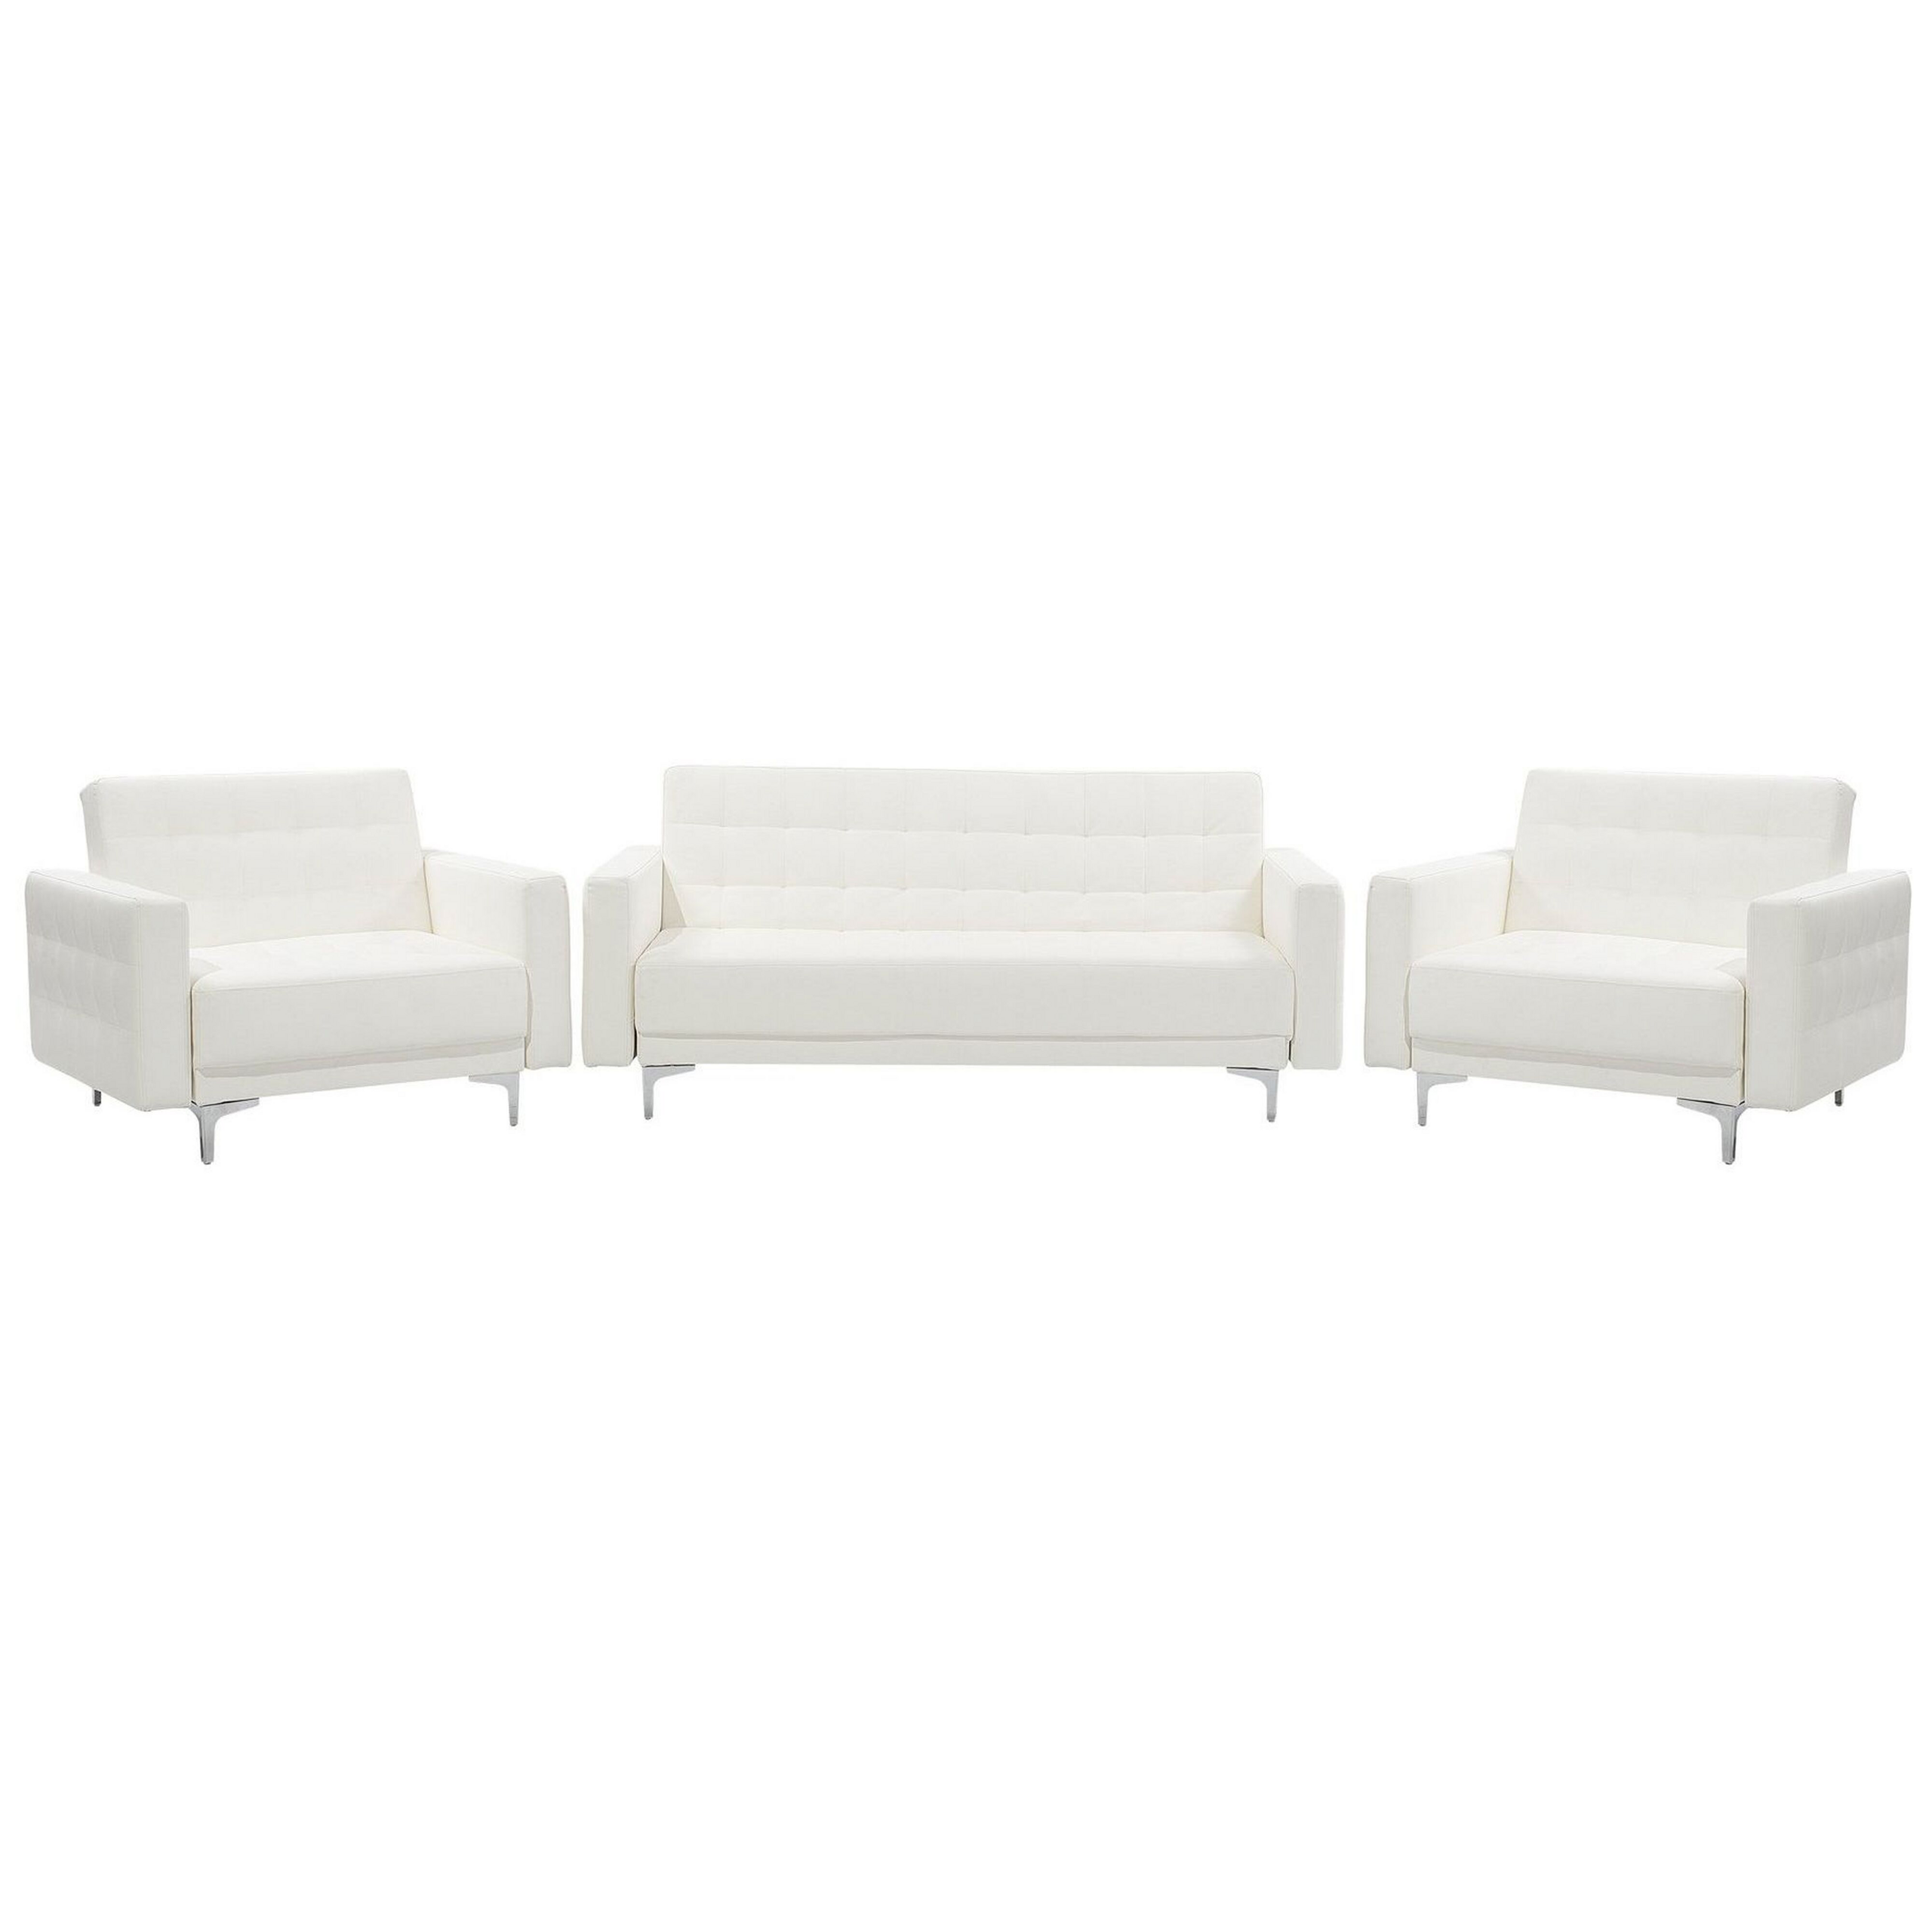 Beliani Living Room Set White Faux Leather Tufted 3 Seater Sofa Bed 2 Reclining Armchairs Modern 3-Piece Suite